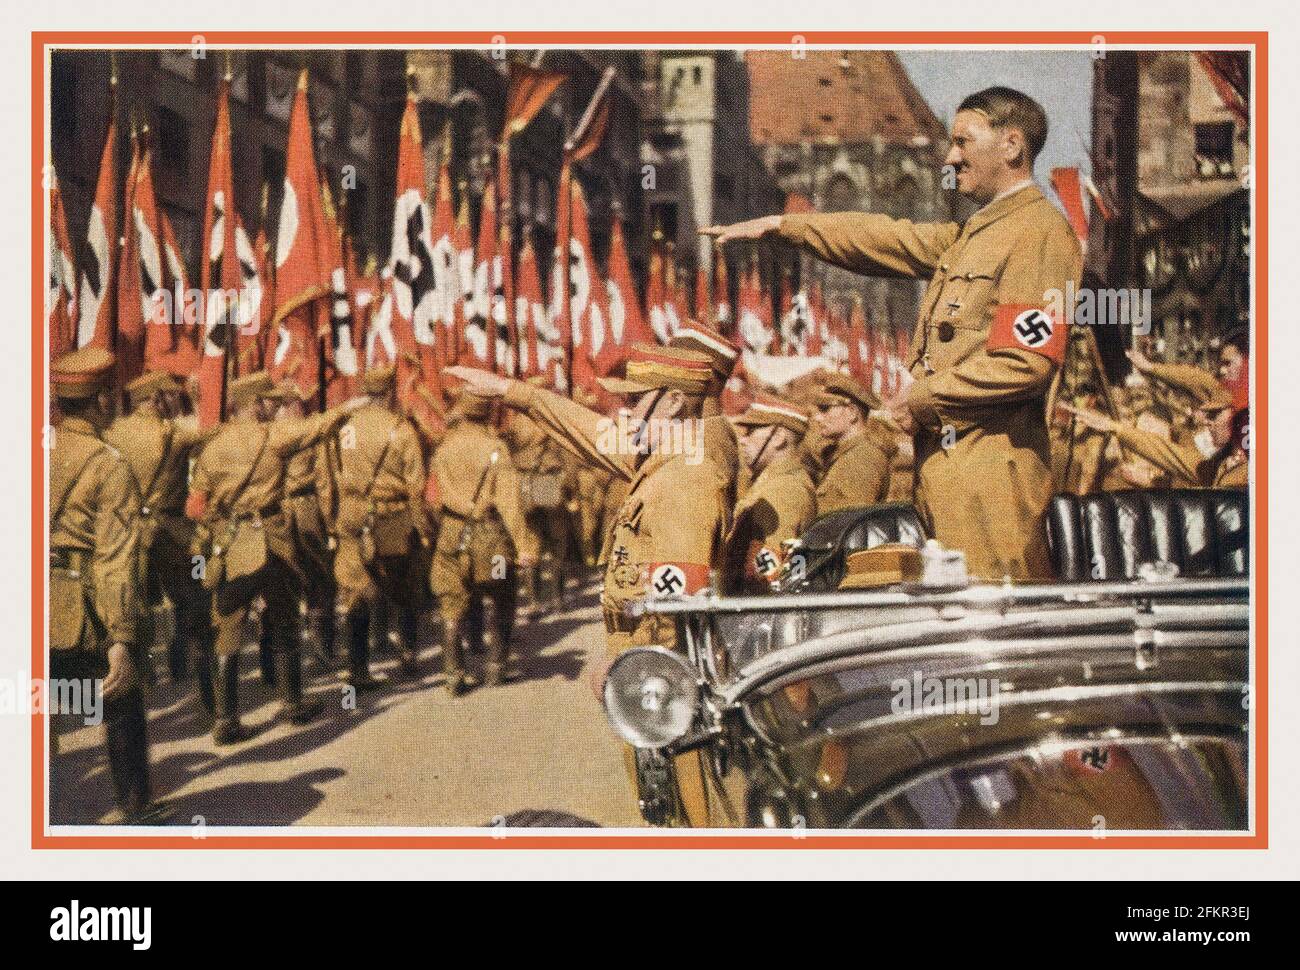 Adolf Hitler saluting SA Troops  Vintage Nazi Germany c1935. Nuremberg Rally, color photo card of Adolf Hitler wearing a swastika armband in open top Mercedes and SA troops marching past with swastika flags, Verlag H. Wiedemann ,Sturmabteilung The official uniform of the SA was the brown shirt with a brown tie  'The Brown Shirts'. Stock Photo